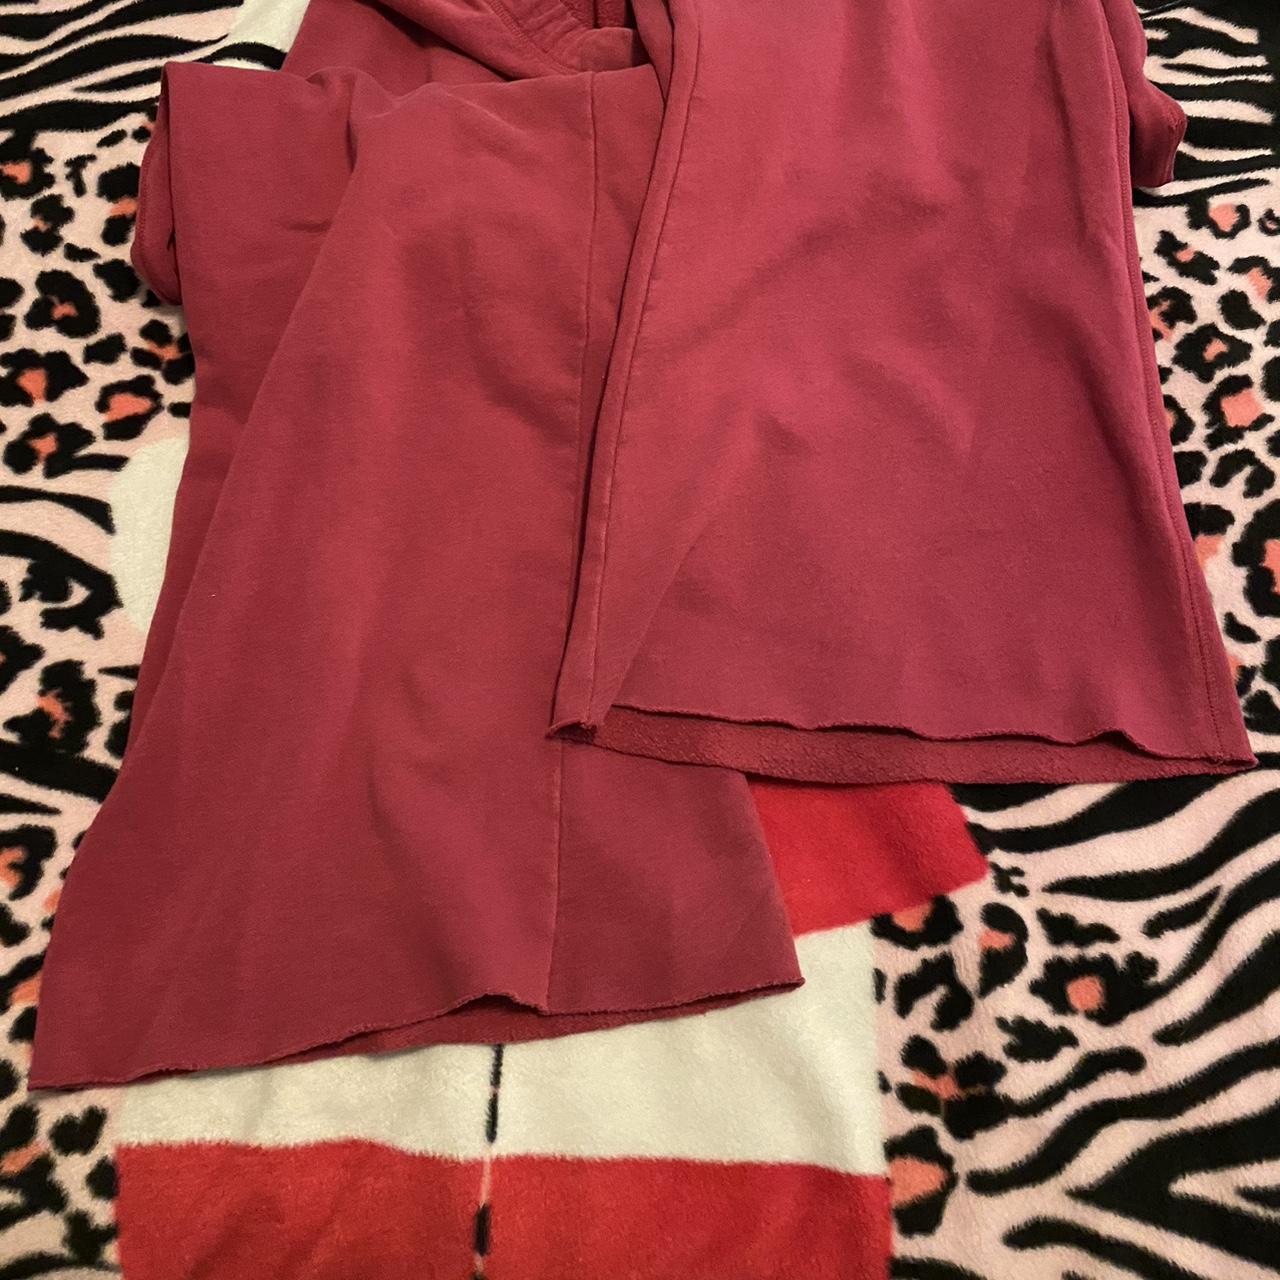 Aeropostale Women's Pink and White Joggers-tracksuits (7)